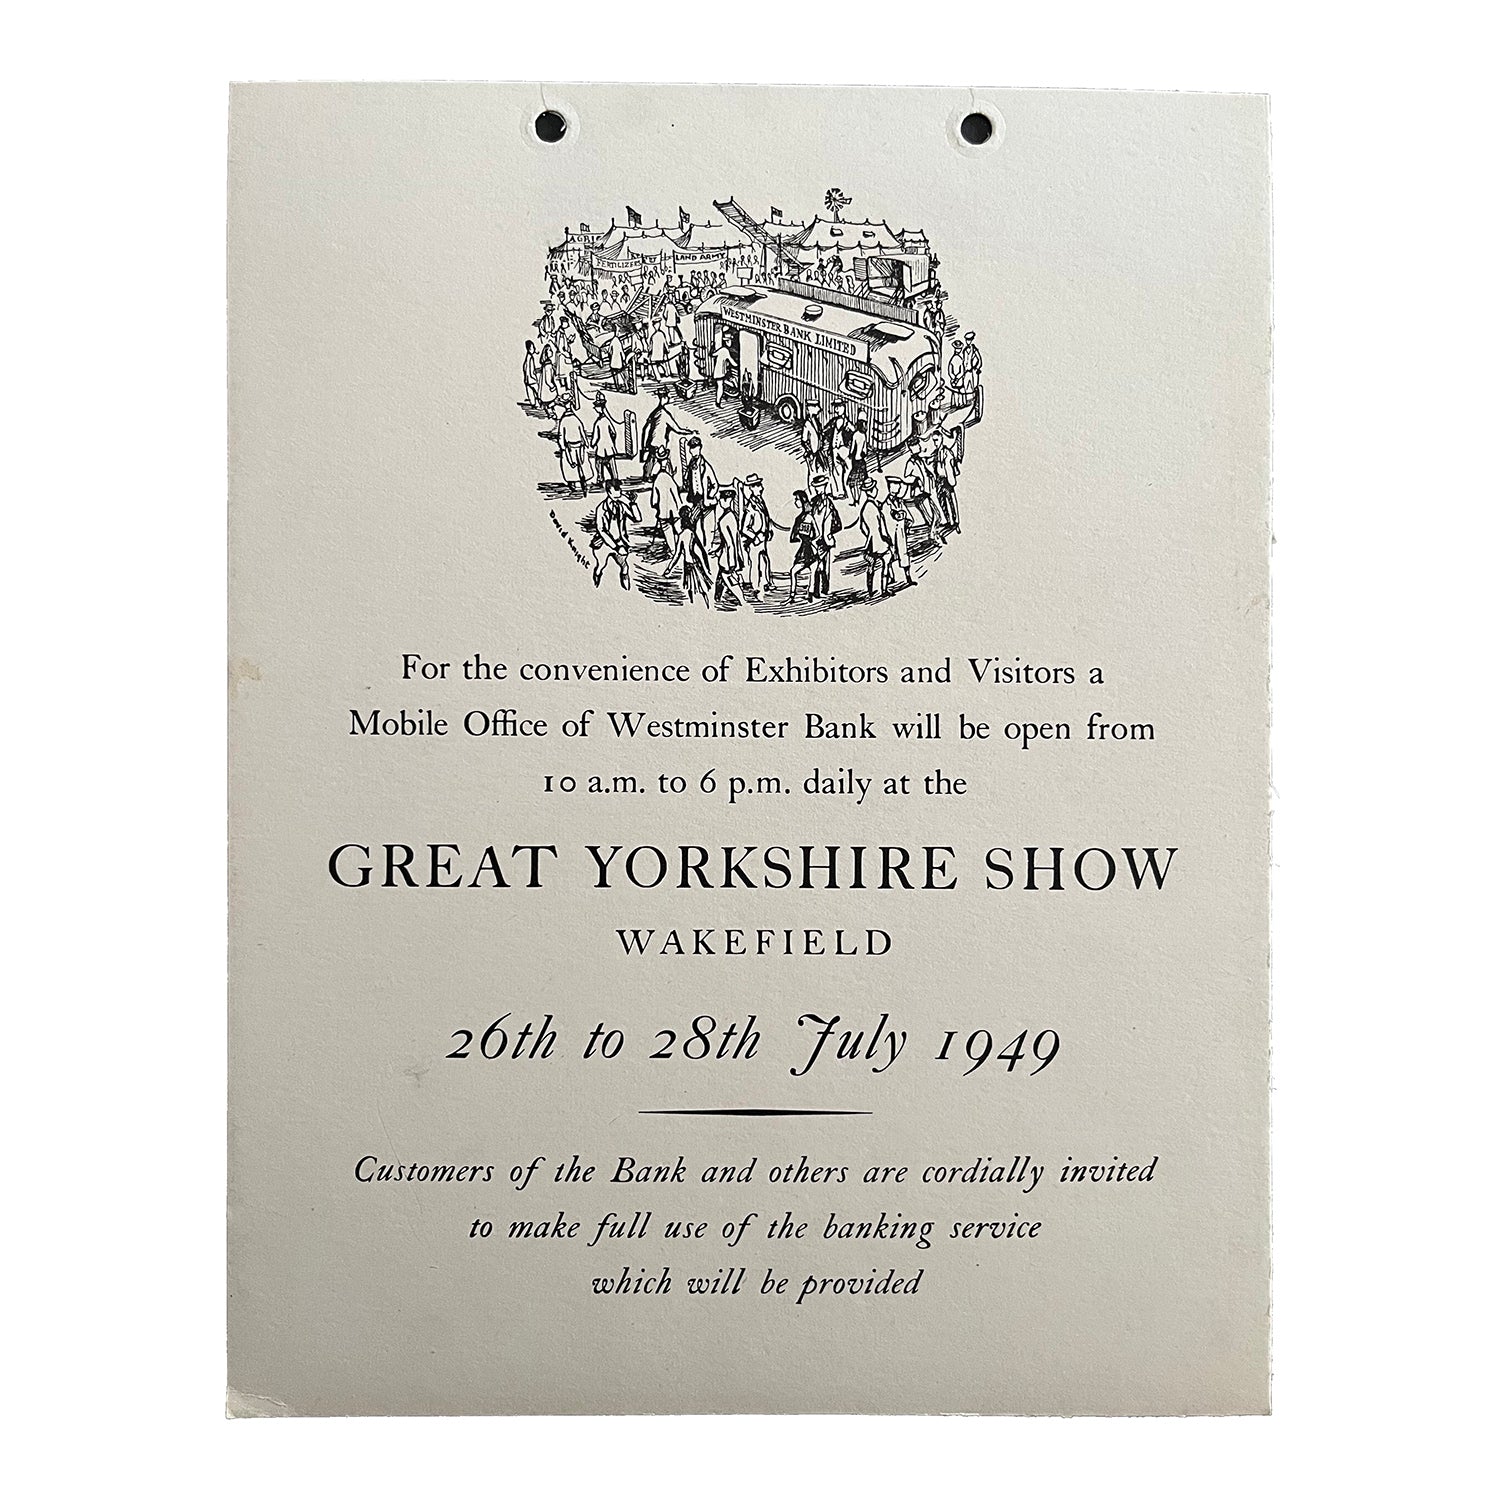 hanging card exhibitor notice published by the Westminster Bank for display at the Great Yorkshire Show, 1949.